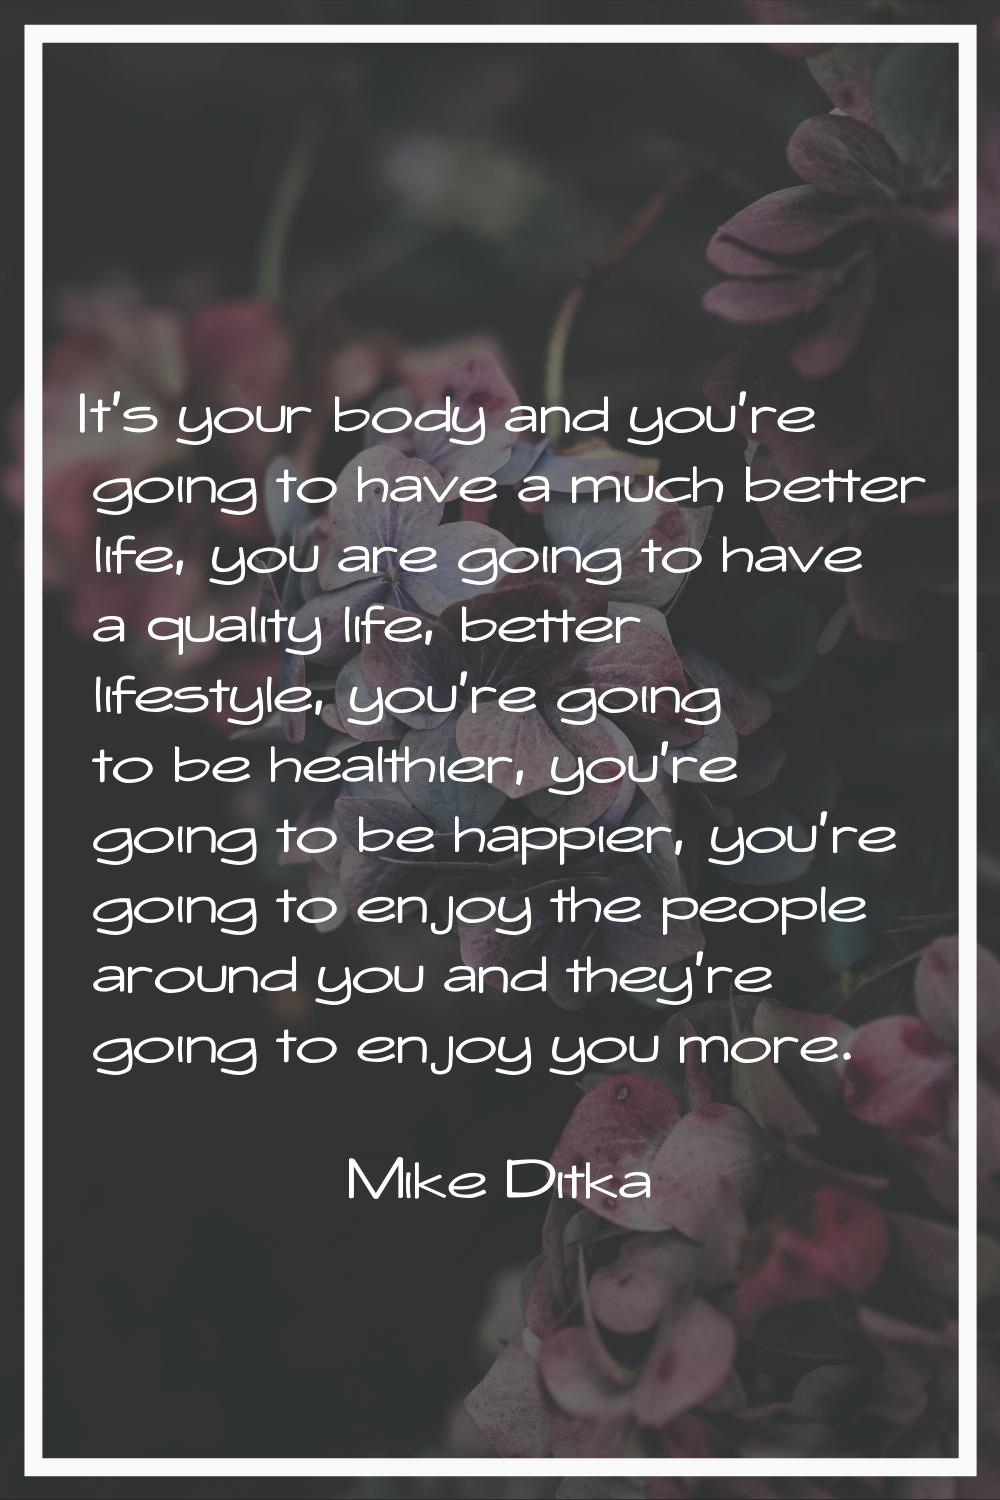 It's your body and you're going to have a much better life, you are going to have a quality life, b